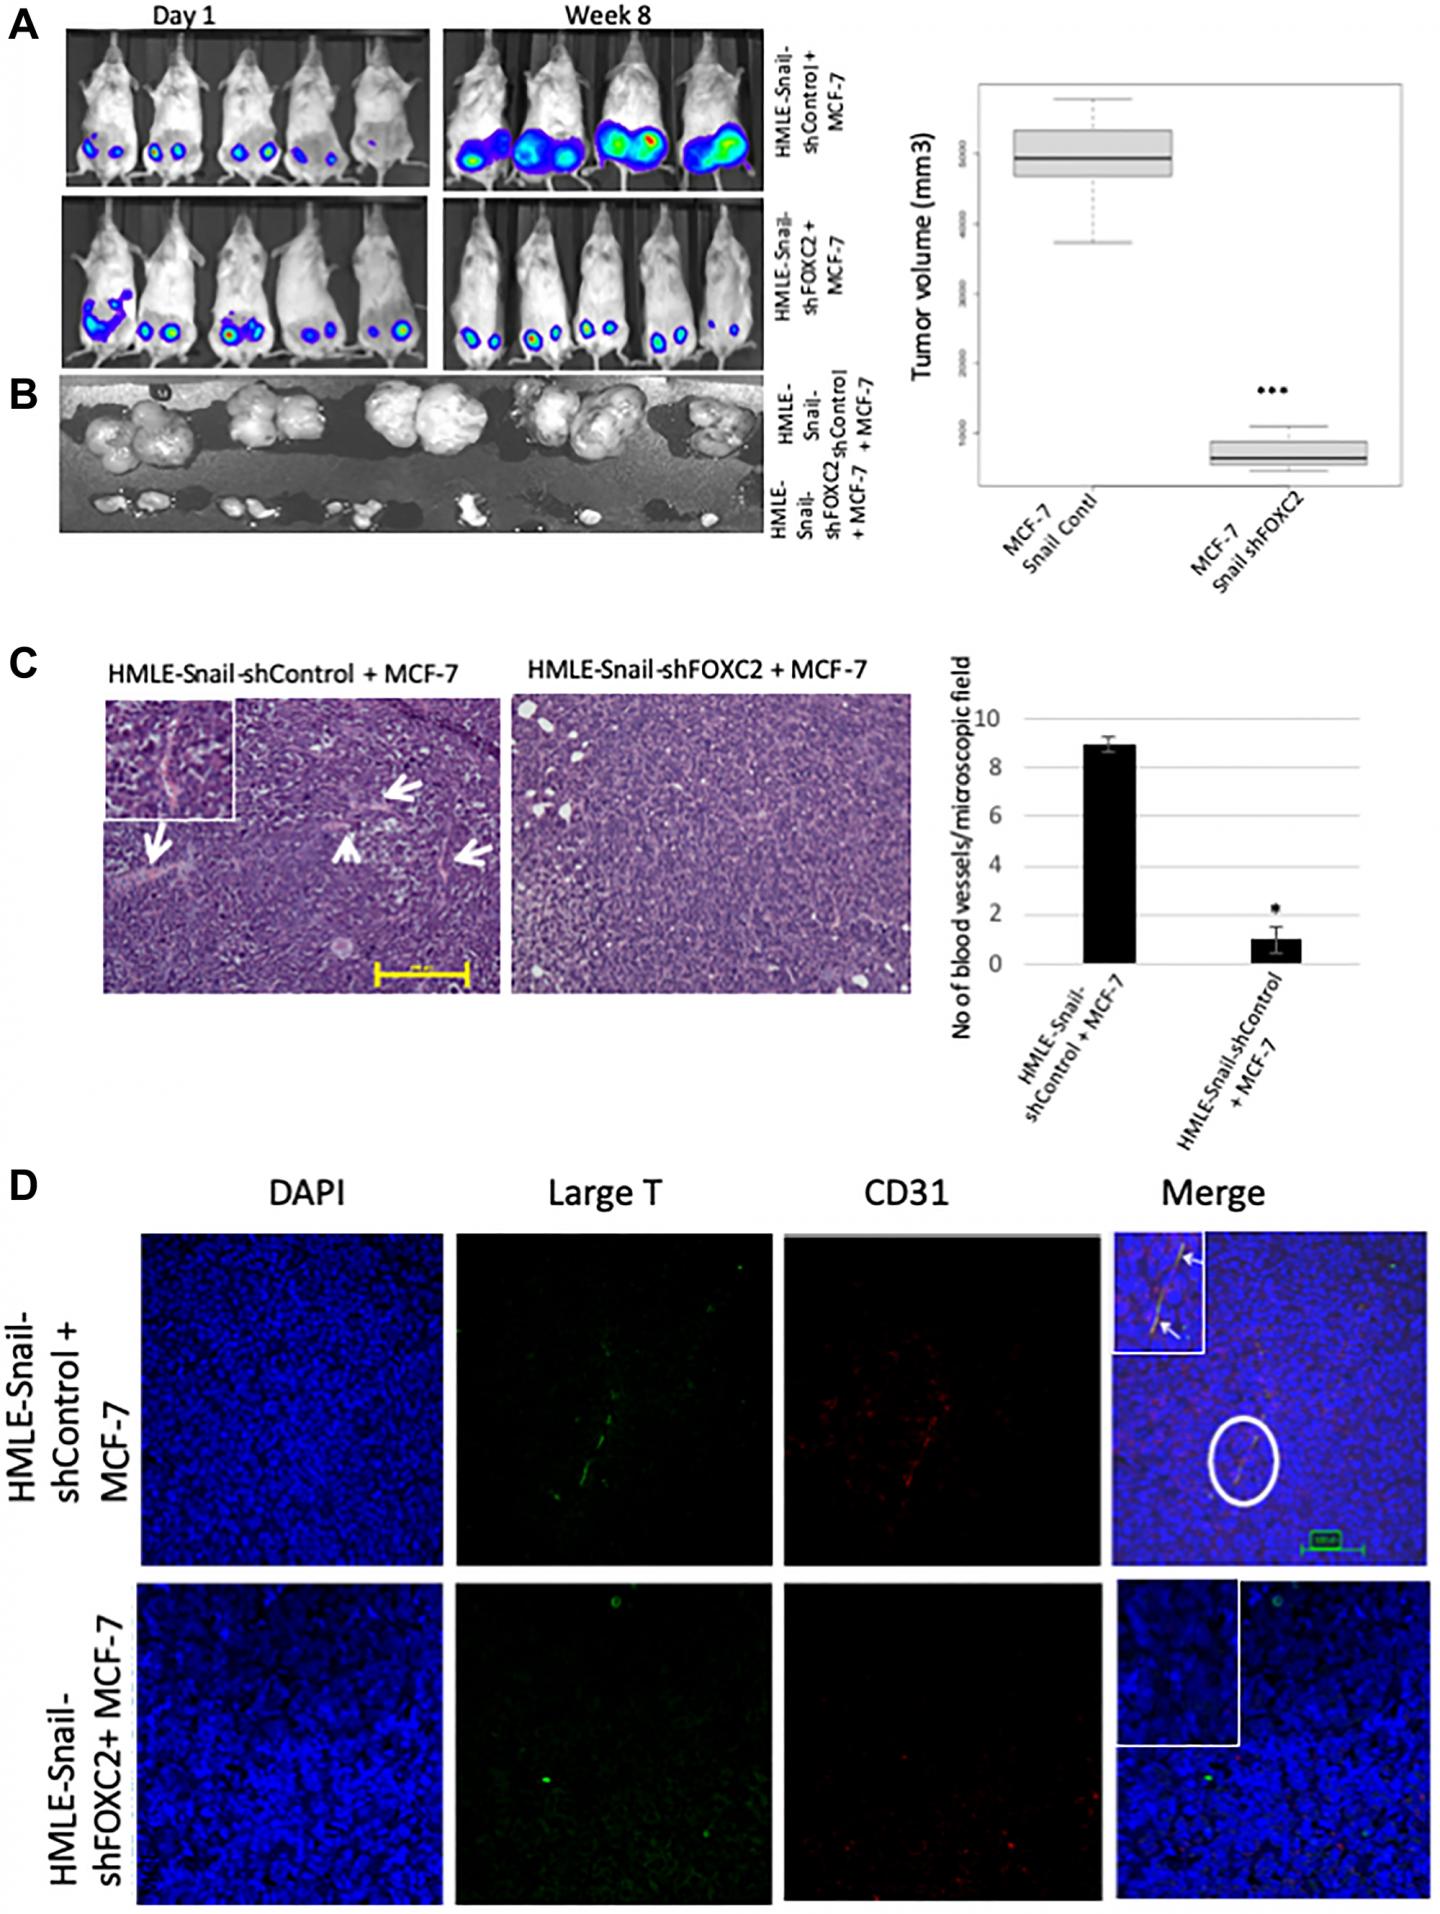 Oncotarget: Epithelial-mesenchymal transitions fabricate endothelial cells and tumor snort